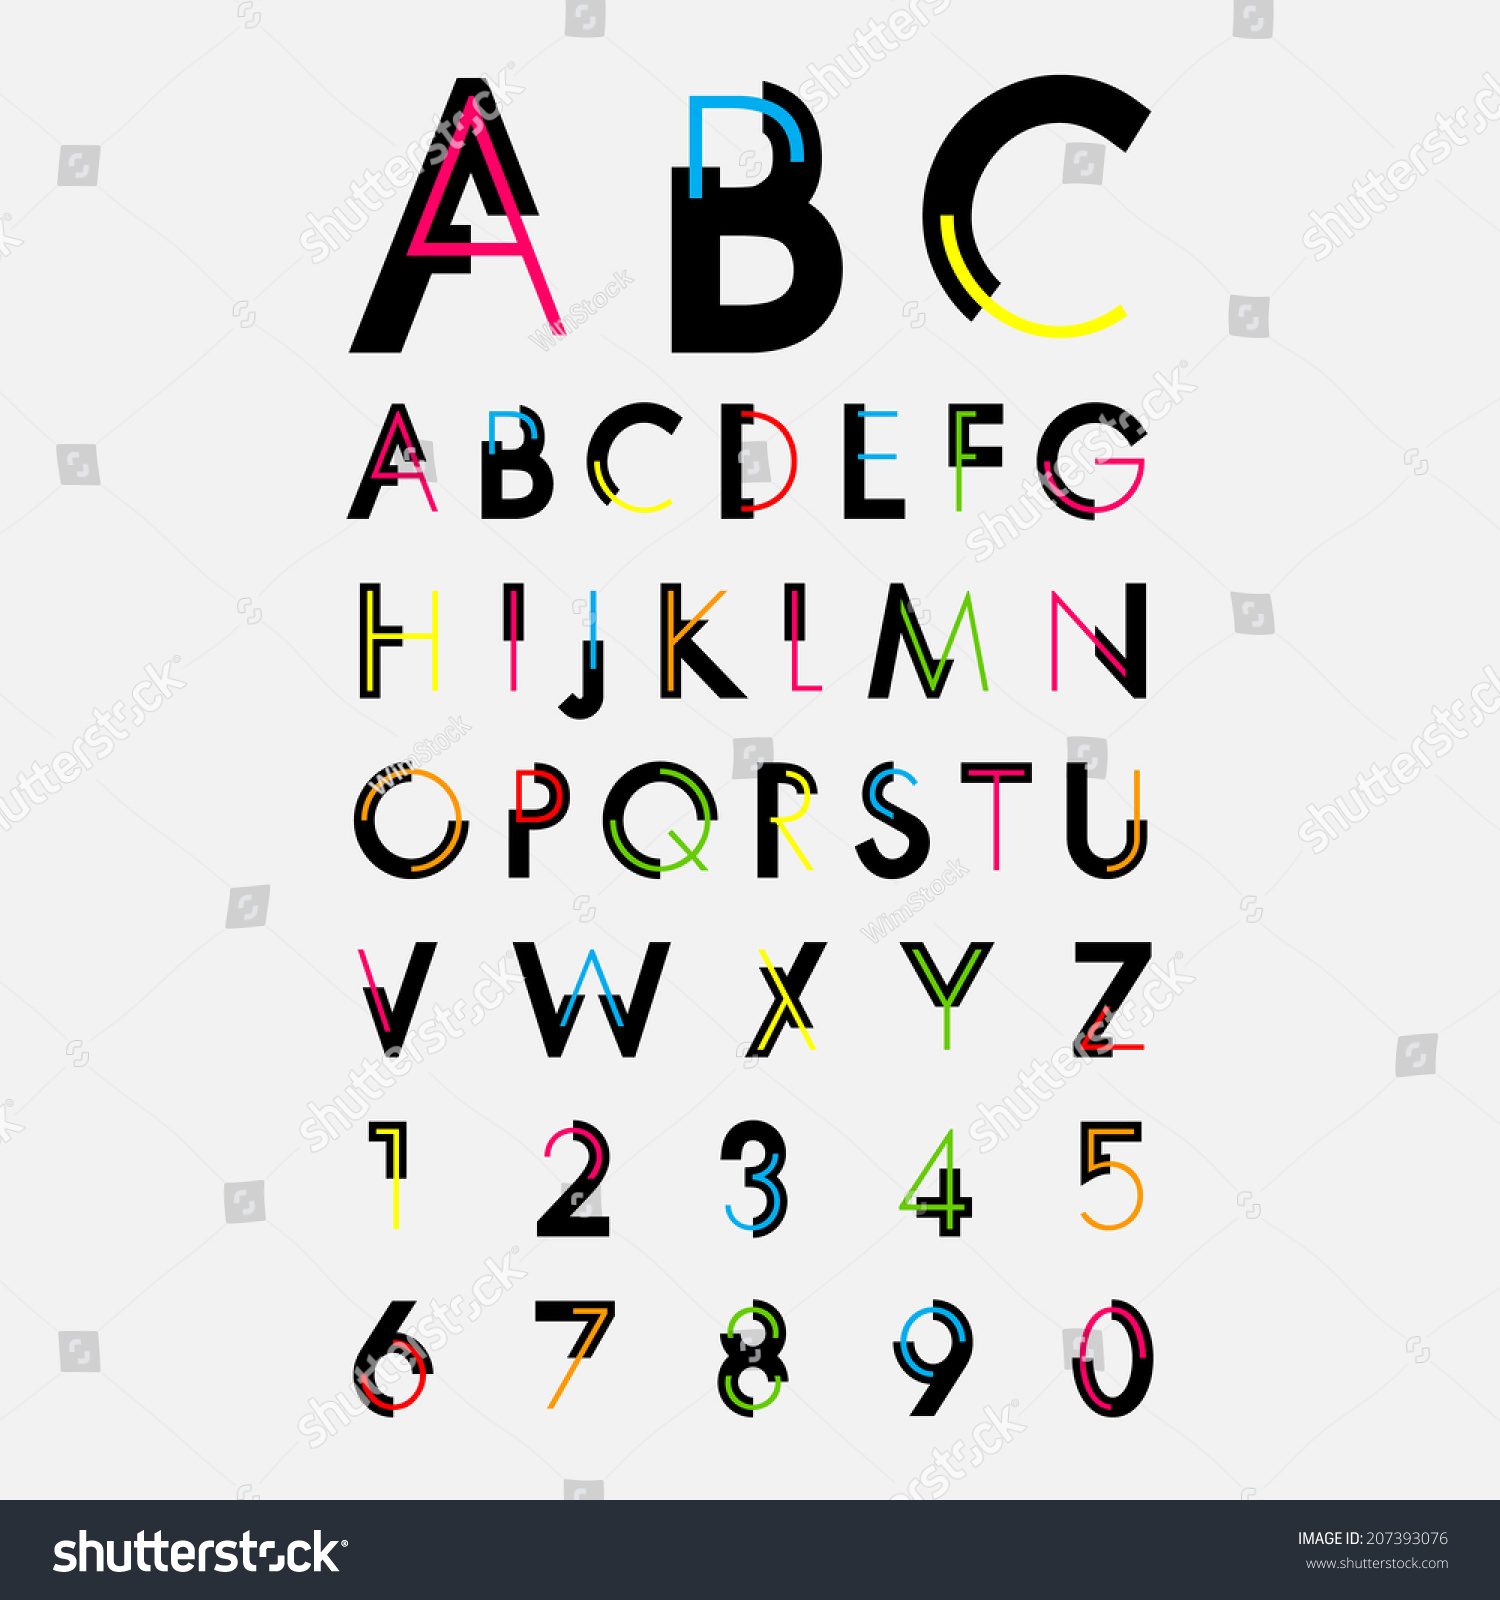 Alphabetic Fonts And Numbers Stock Vector Illustration 207393076 ...